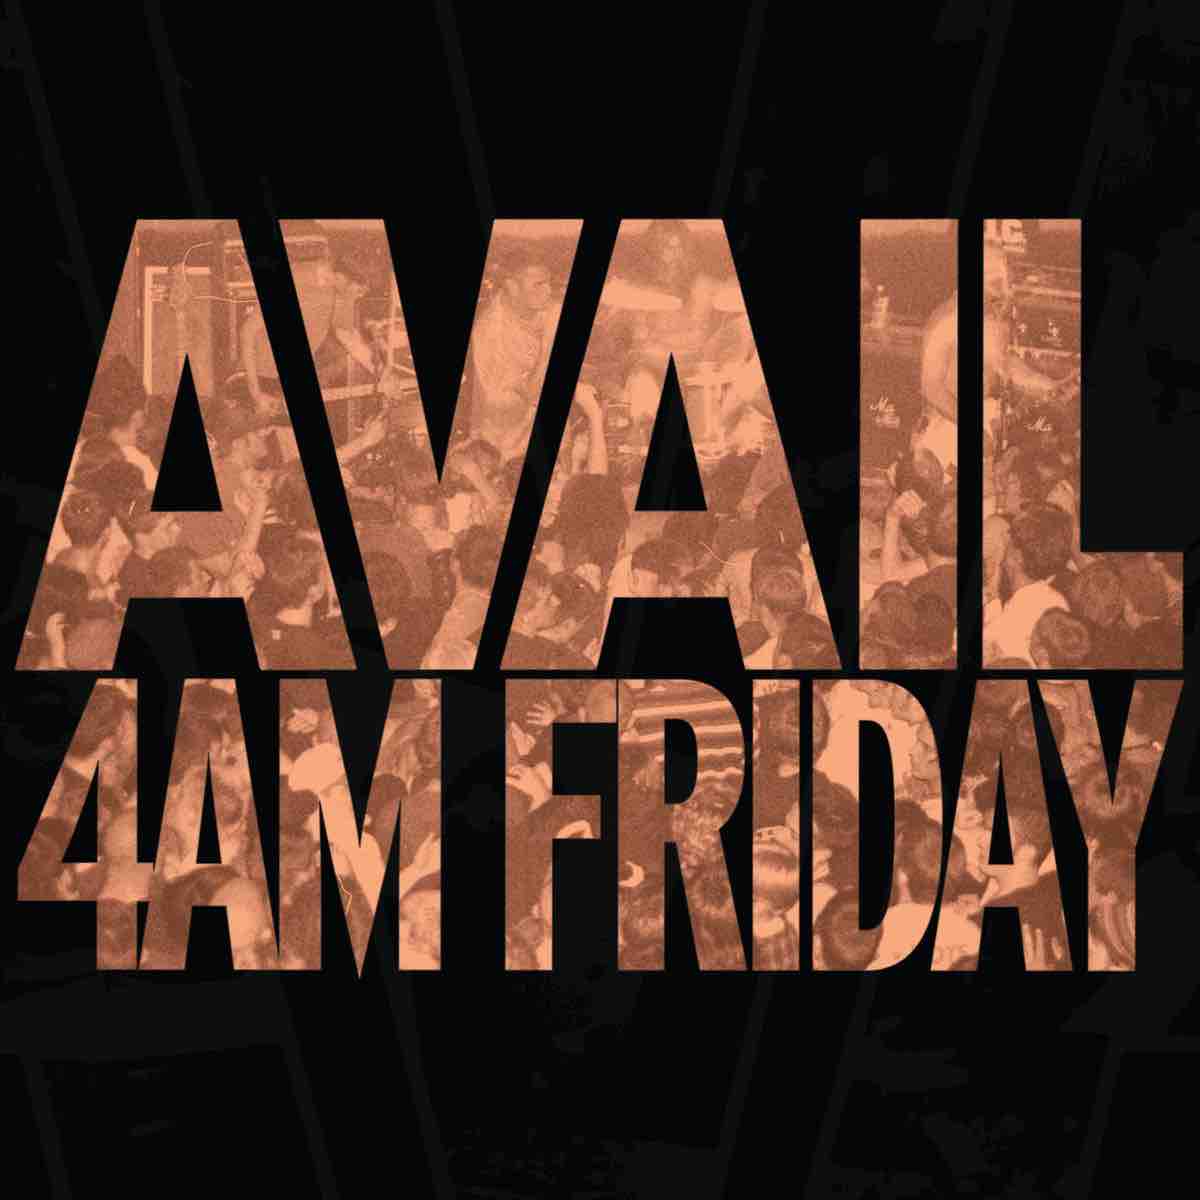 Avail - 4am Friday LP